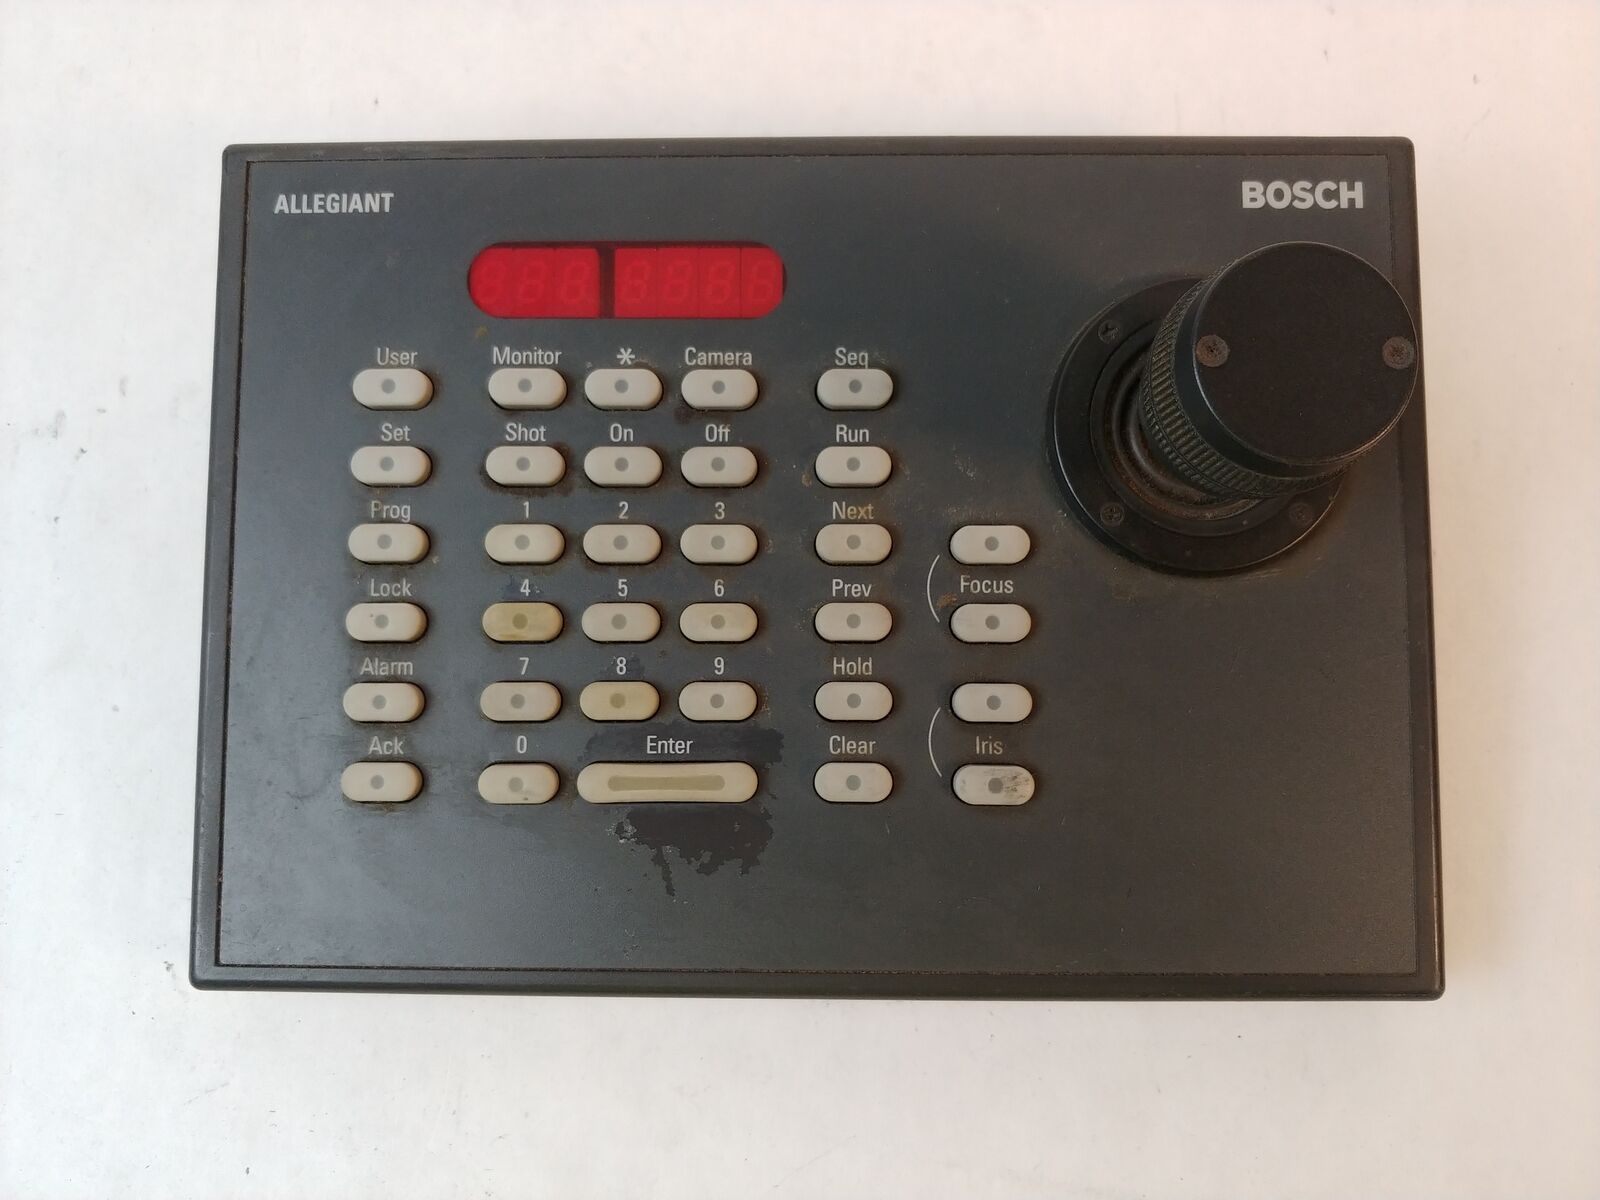 Bosch Ltc 8555/00 Keyboard Controller For Allegiant Systems - For Parts